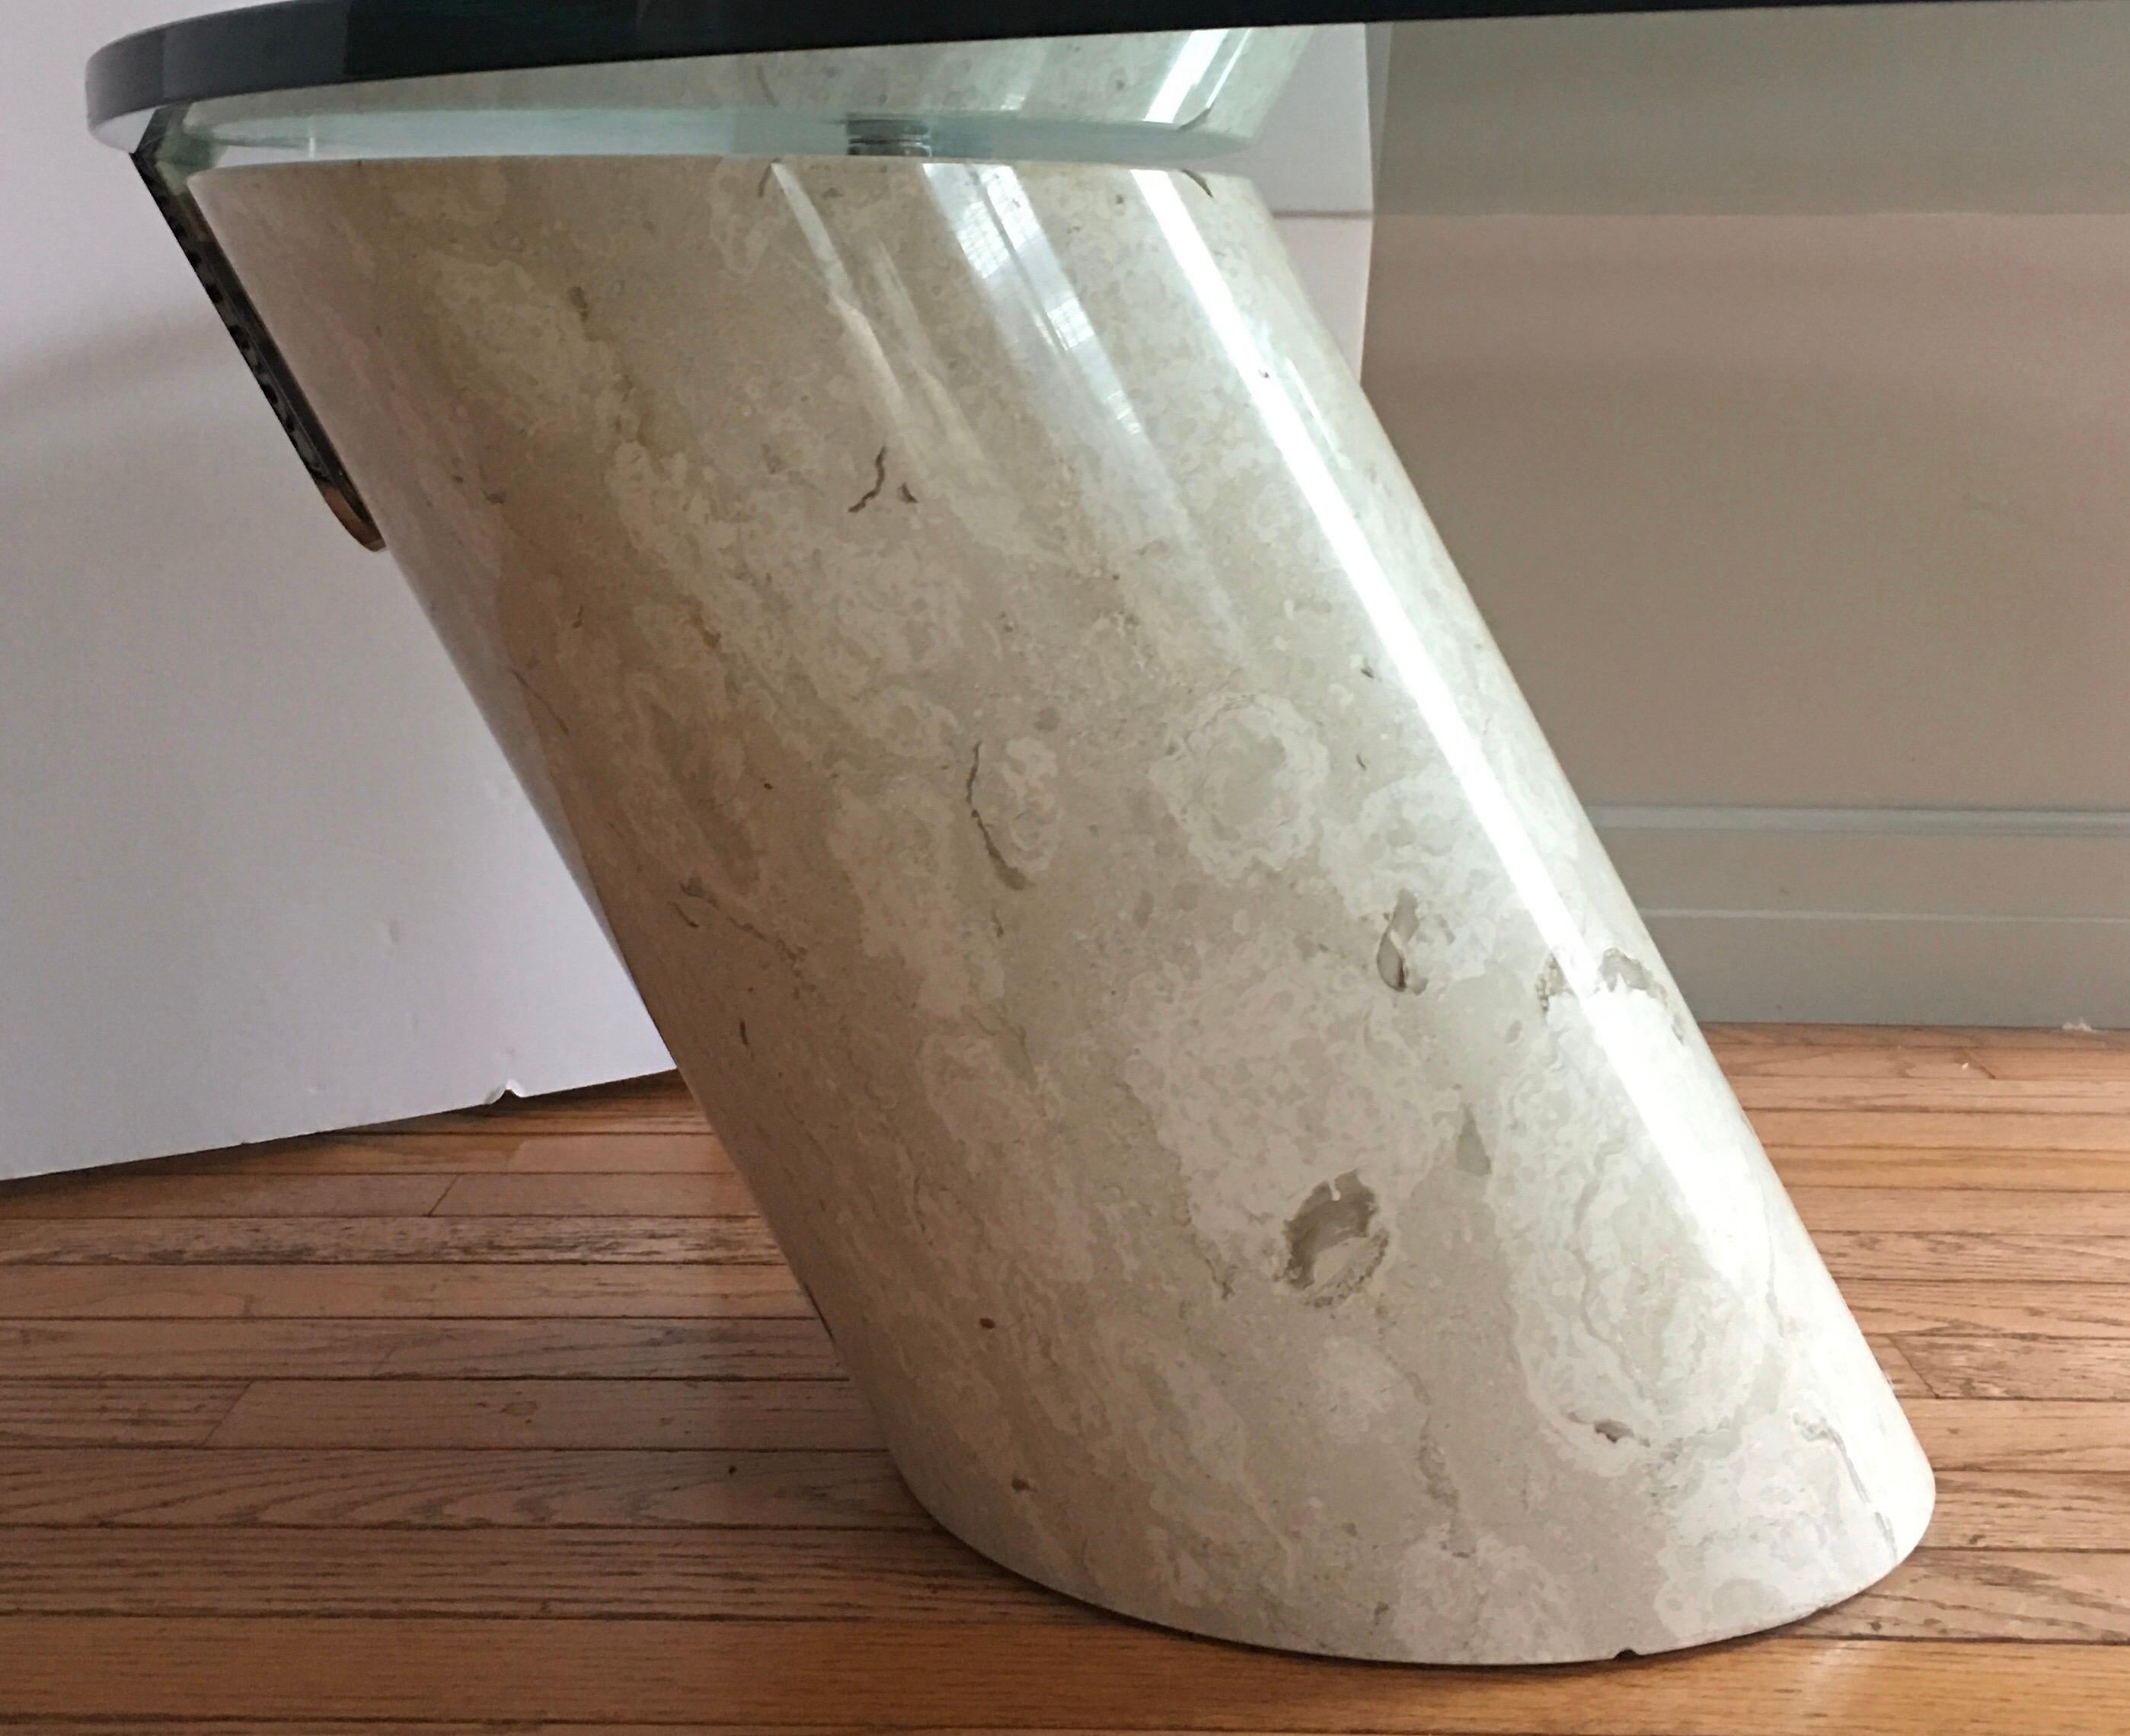 1970s modern Italian cantilevered coffee table with thick oval glass top supported by a solid cream/beige tone marble column base. The thick clear glass oval top is held in place with a chromed clip and studs. Glass top is removable. Cocktail table